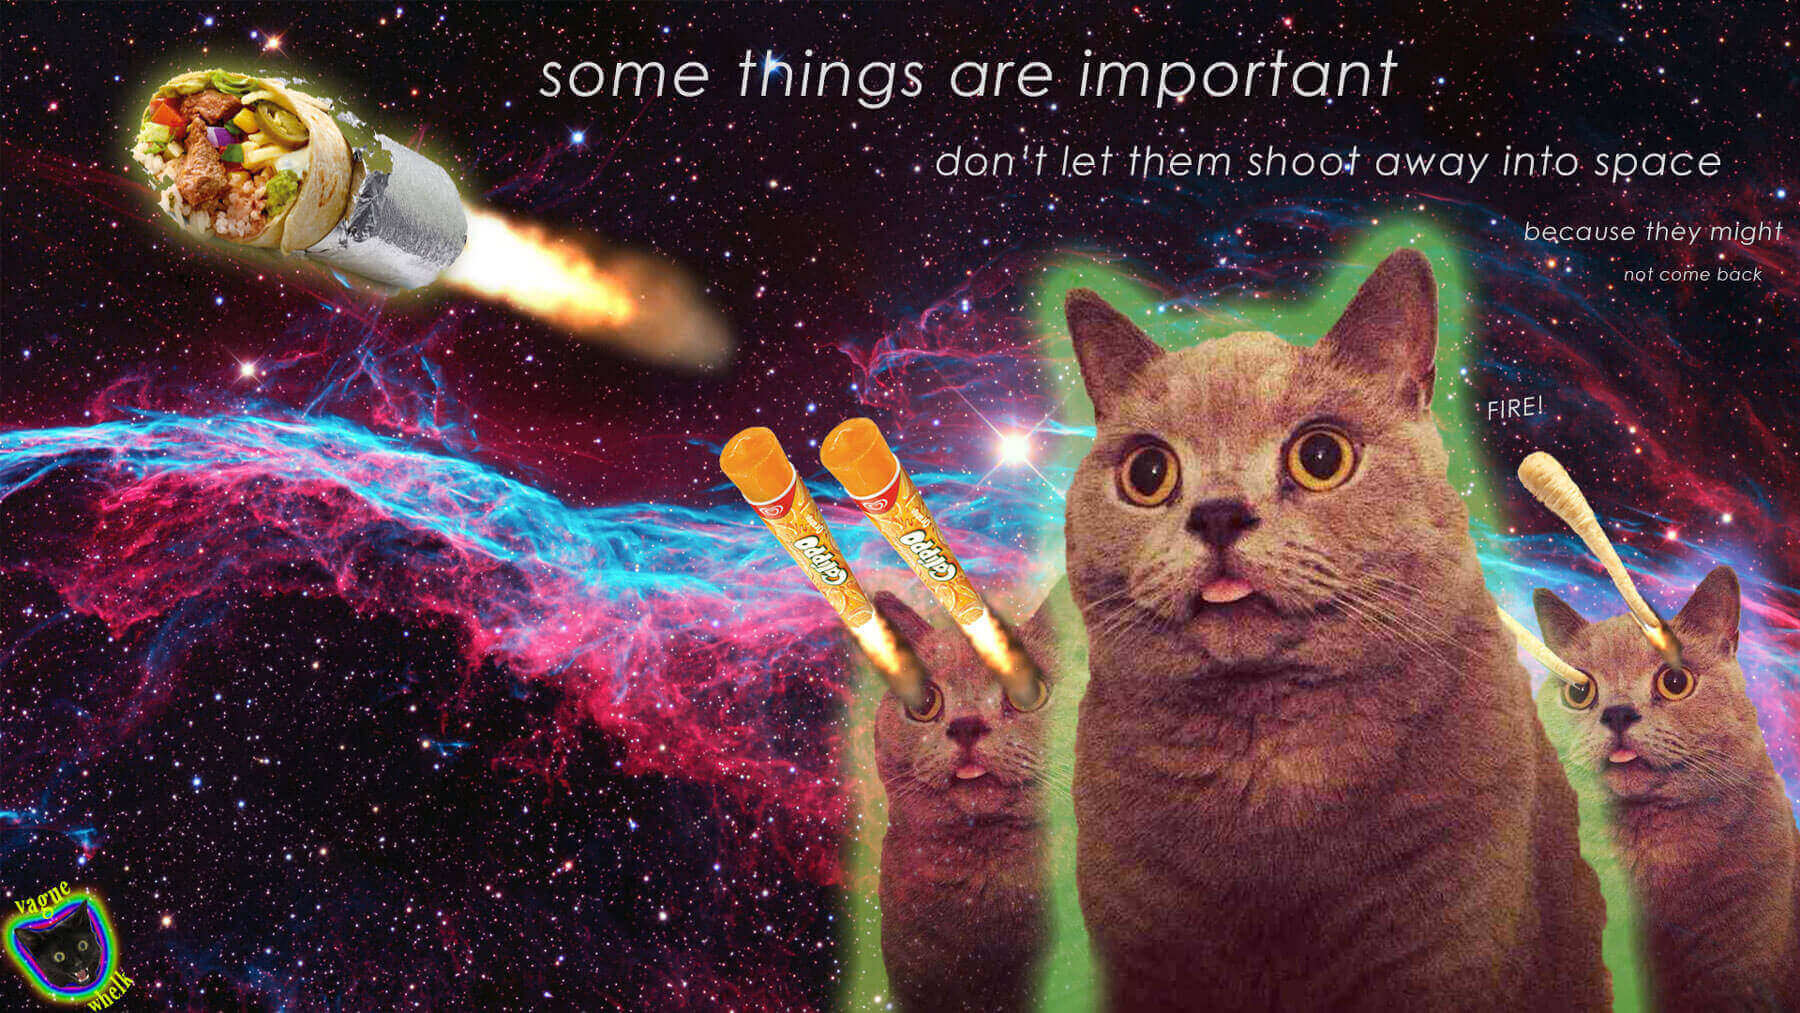 Blep Space Cat does not let important things shoot away into space